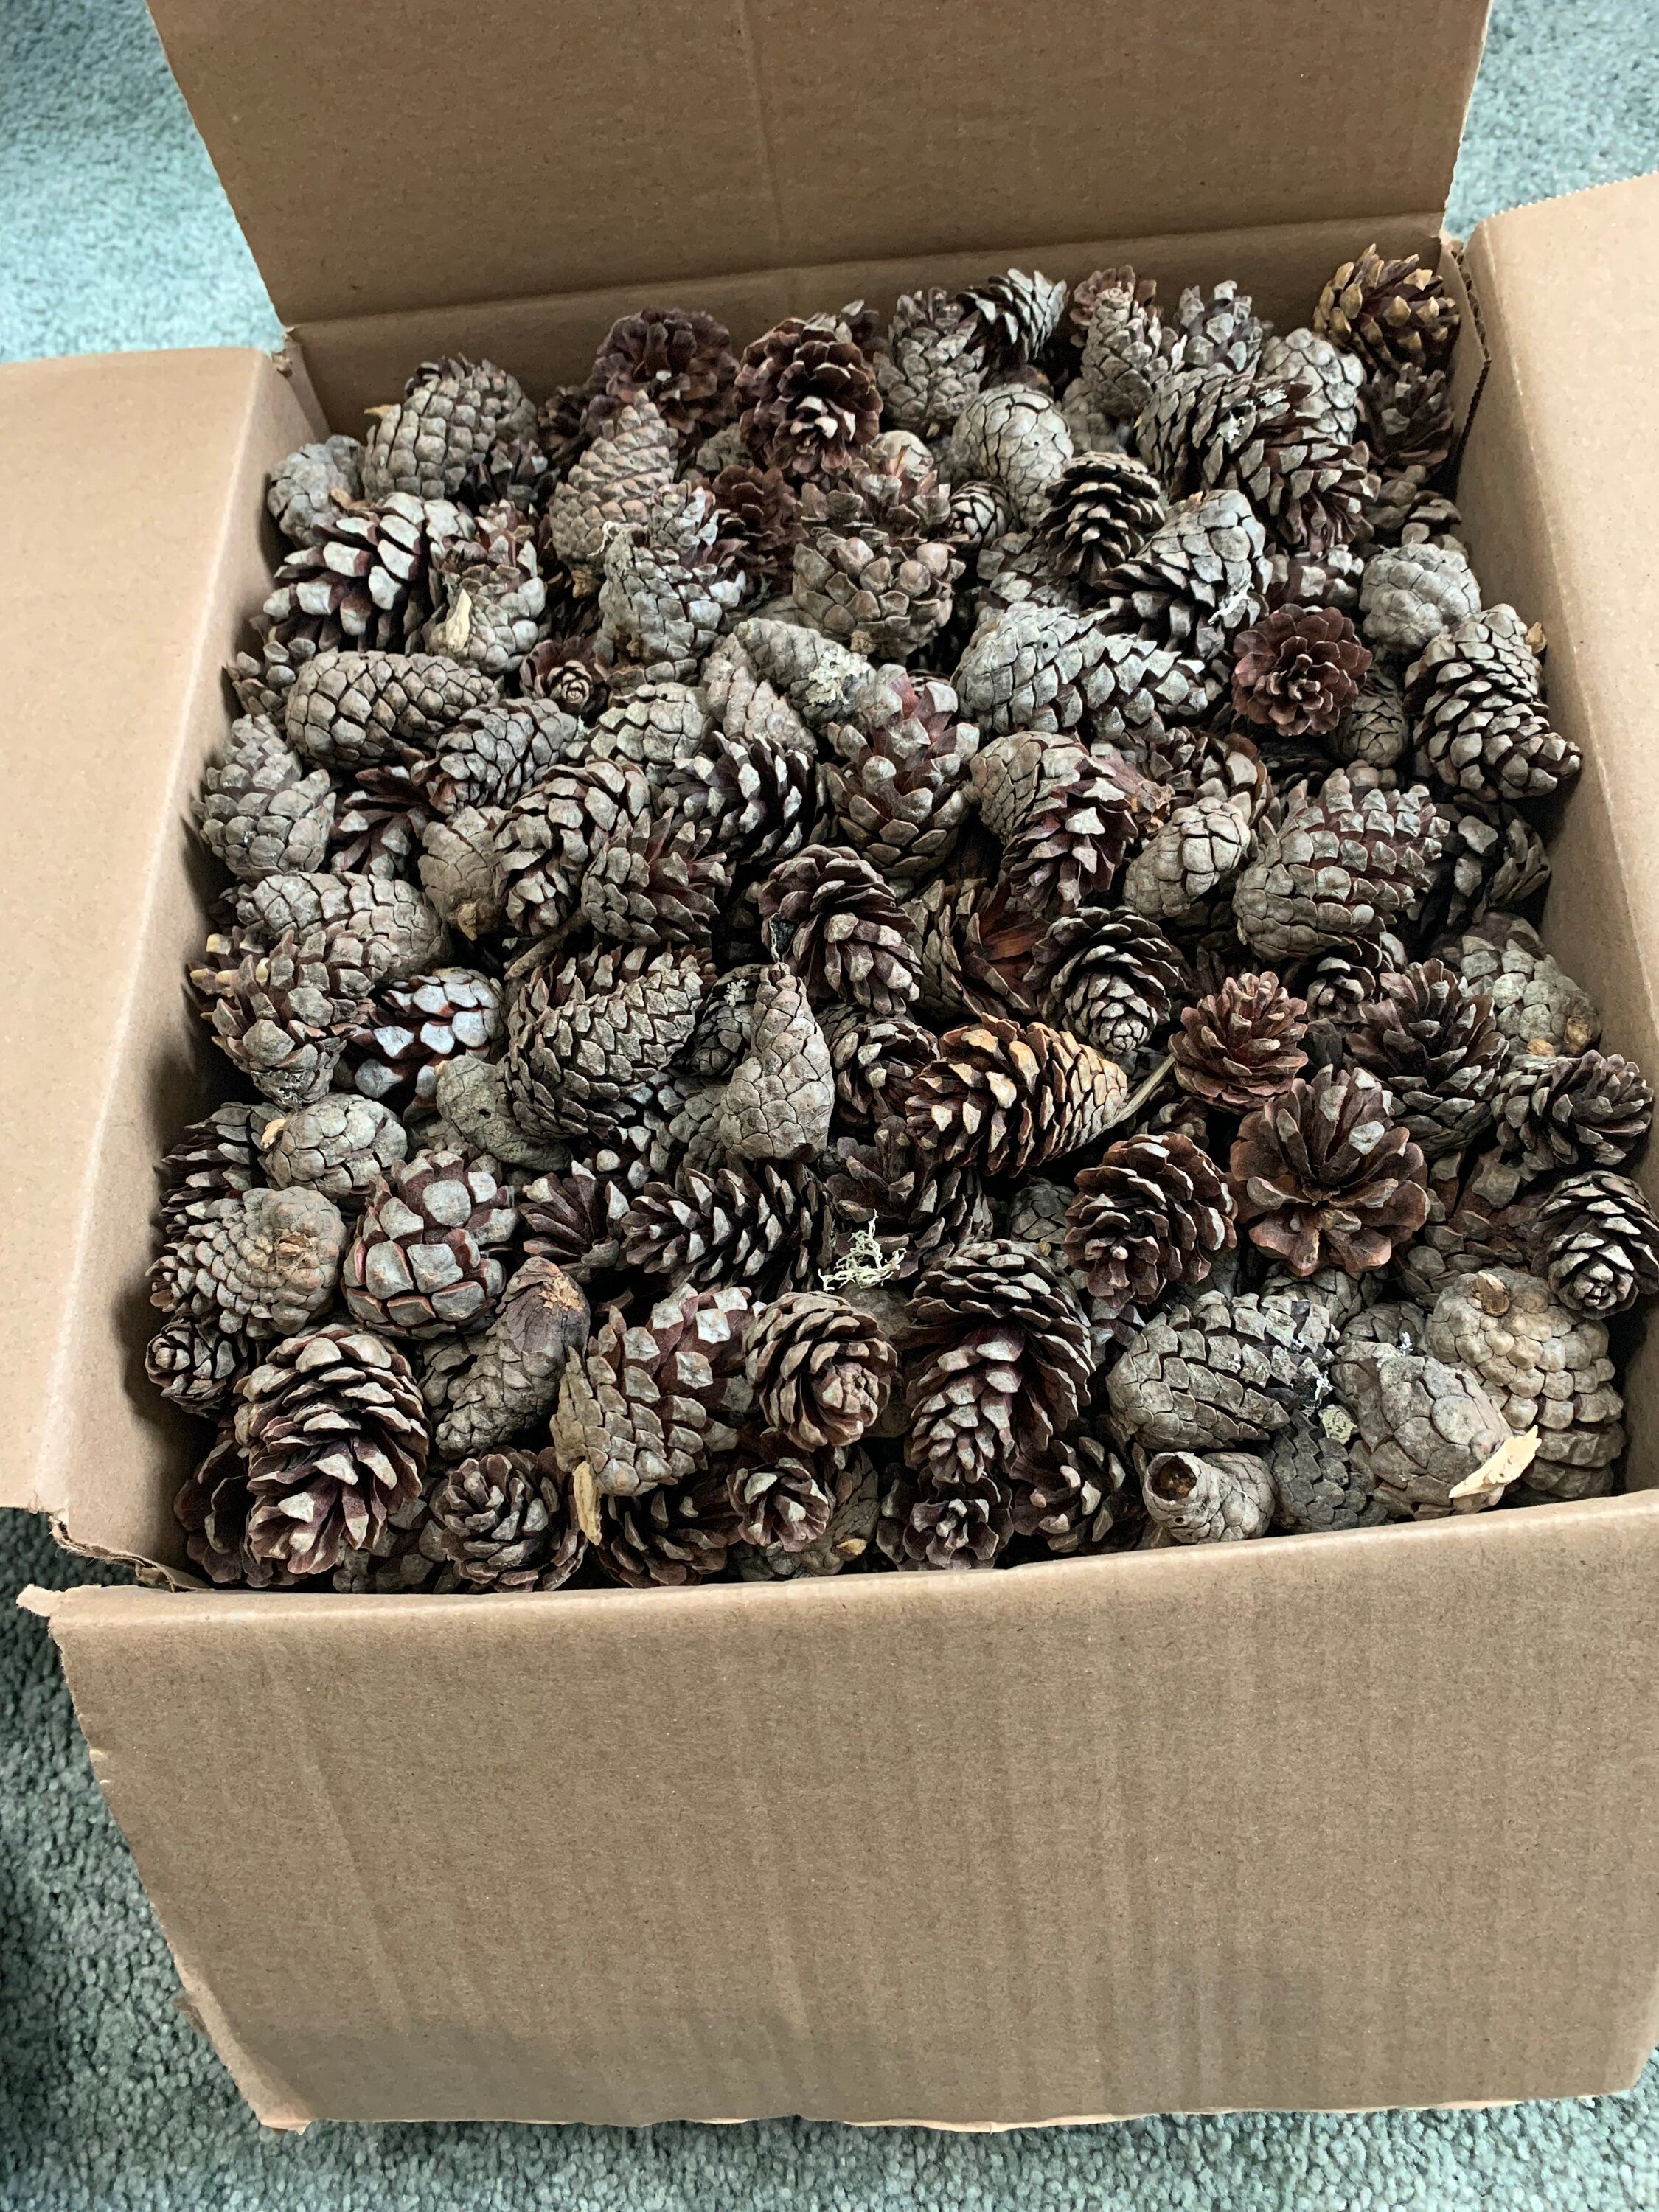 Jack Pine Cone Seconds, Grey Pine, 8 Pounds